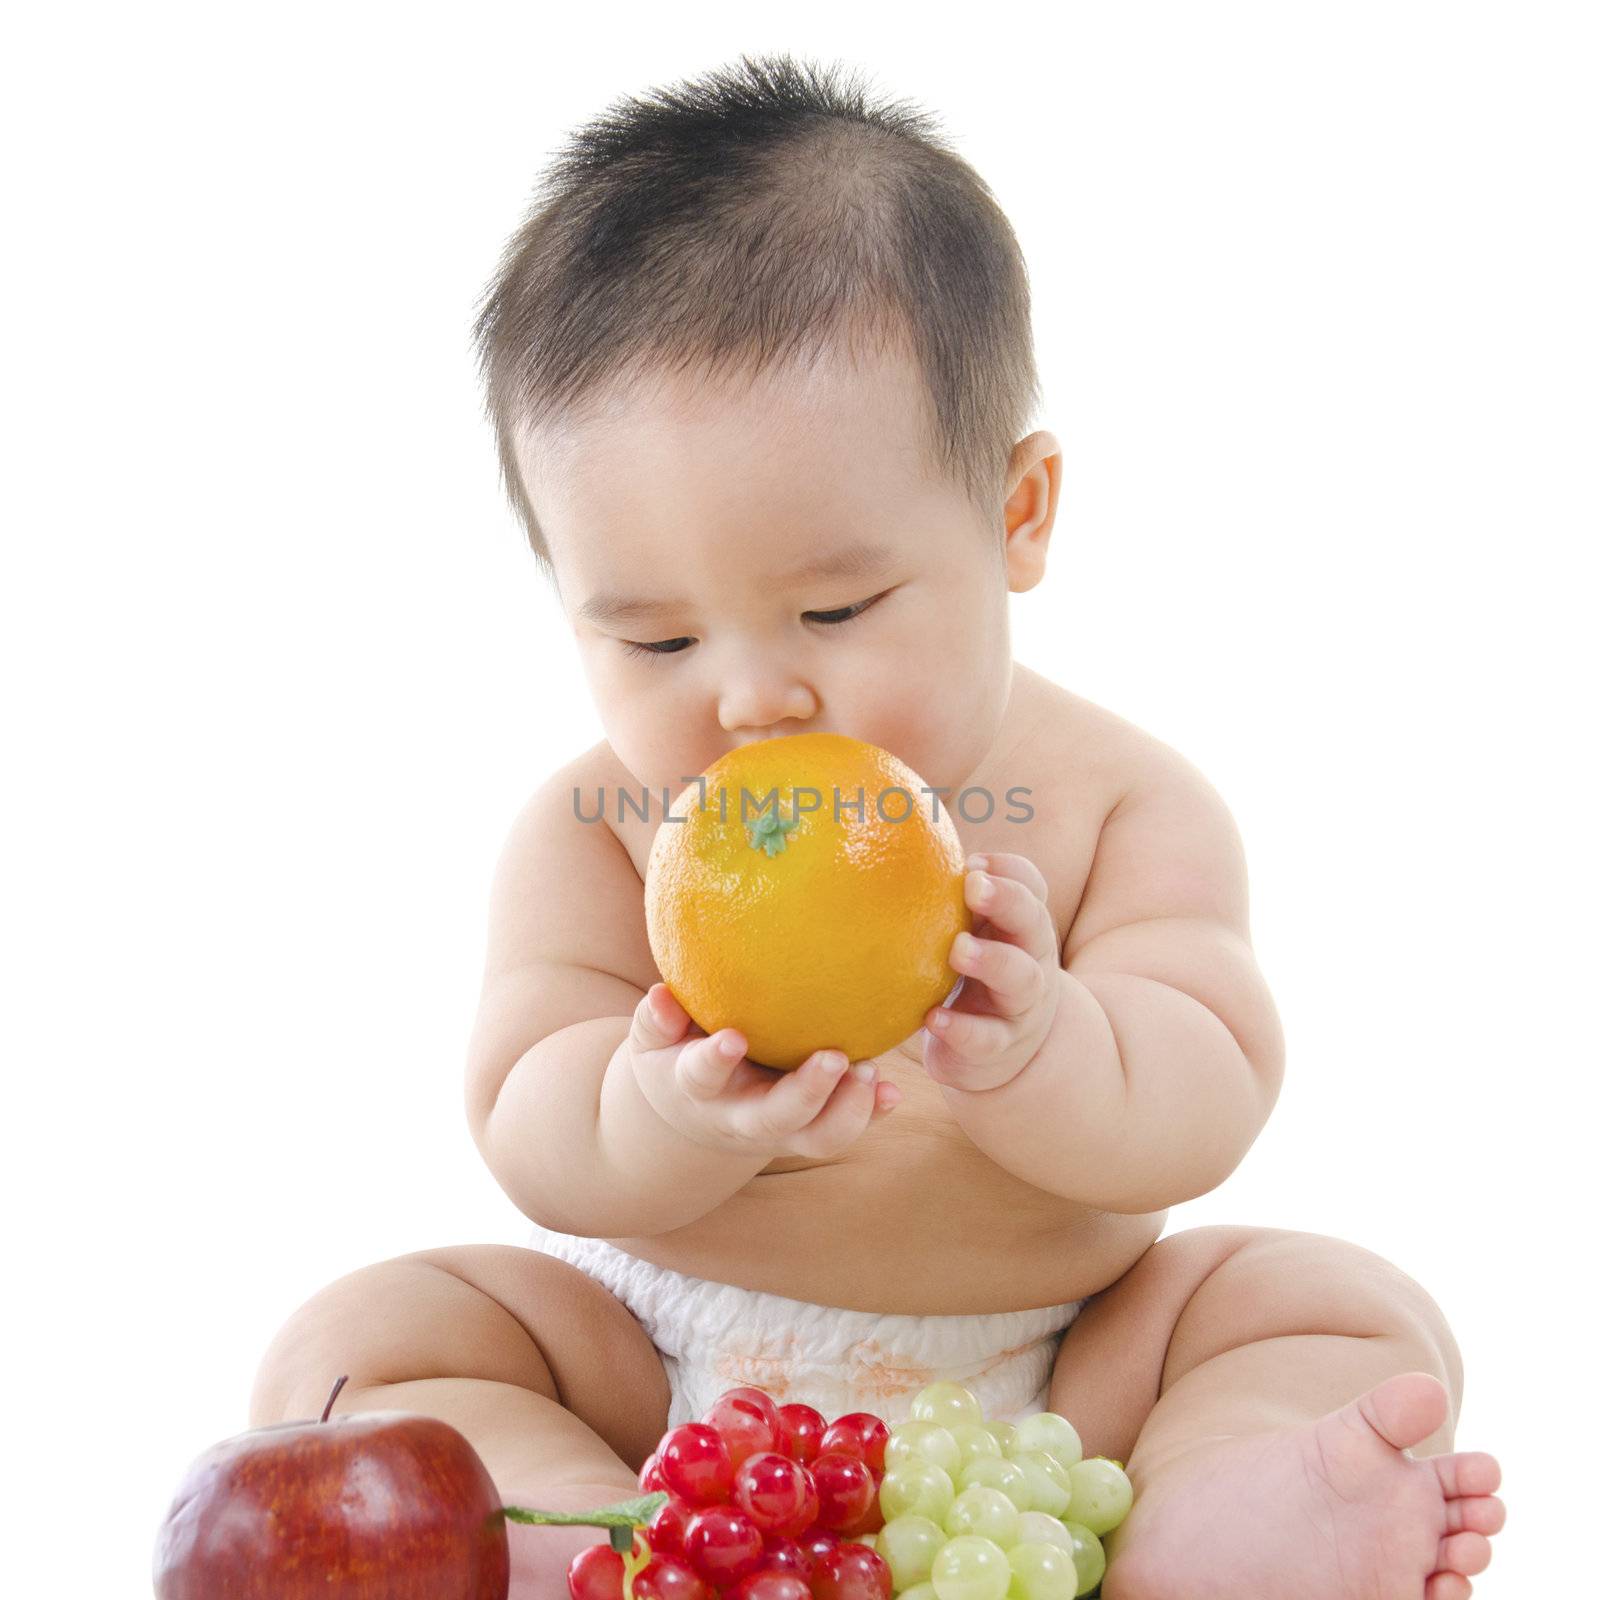 Pan Asian Vegetarian baby playing with fruits on white background